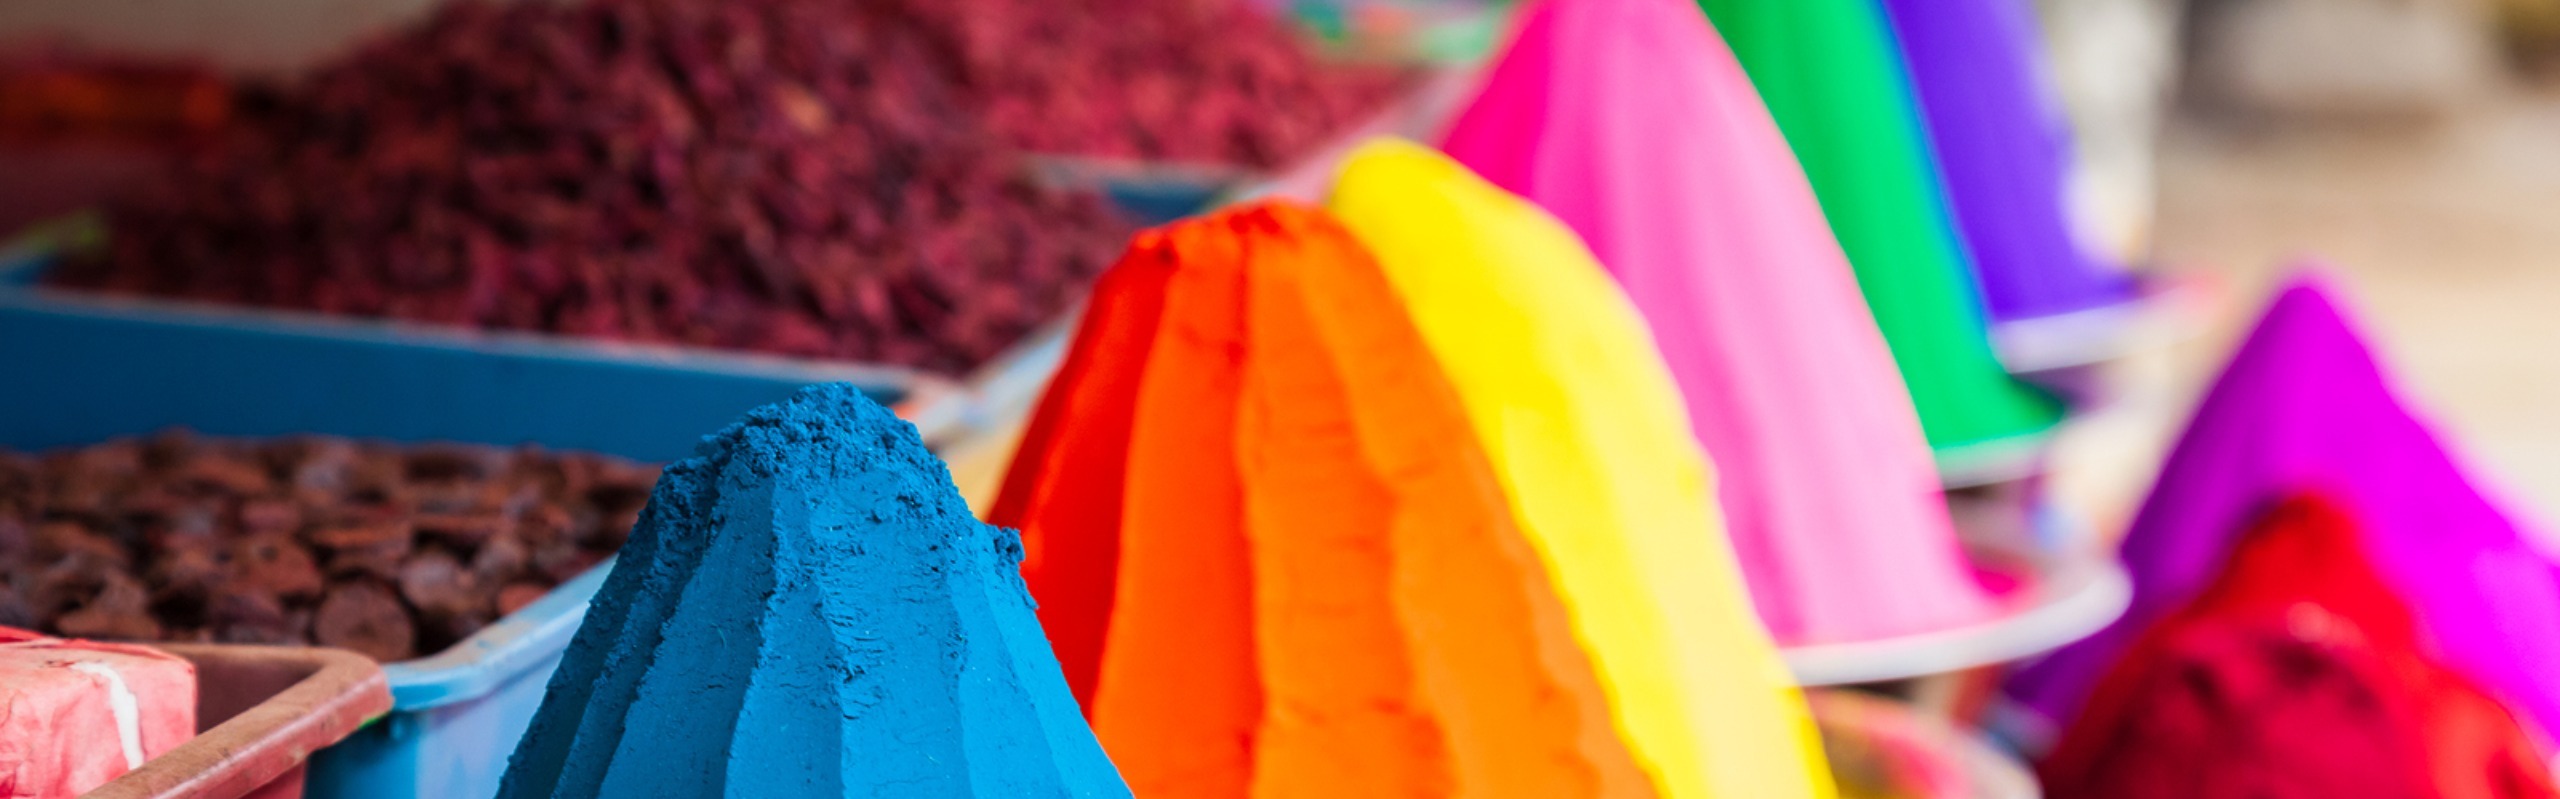 Meanings of Holi Festival Colors — What Colors to Use? 